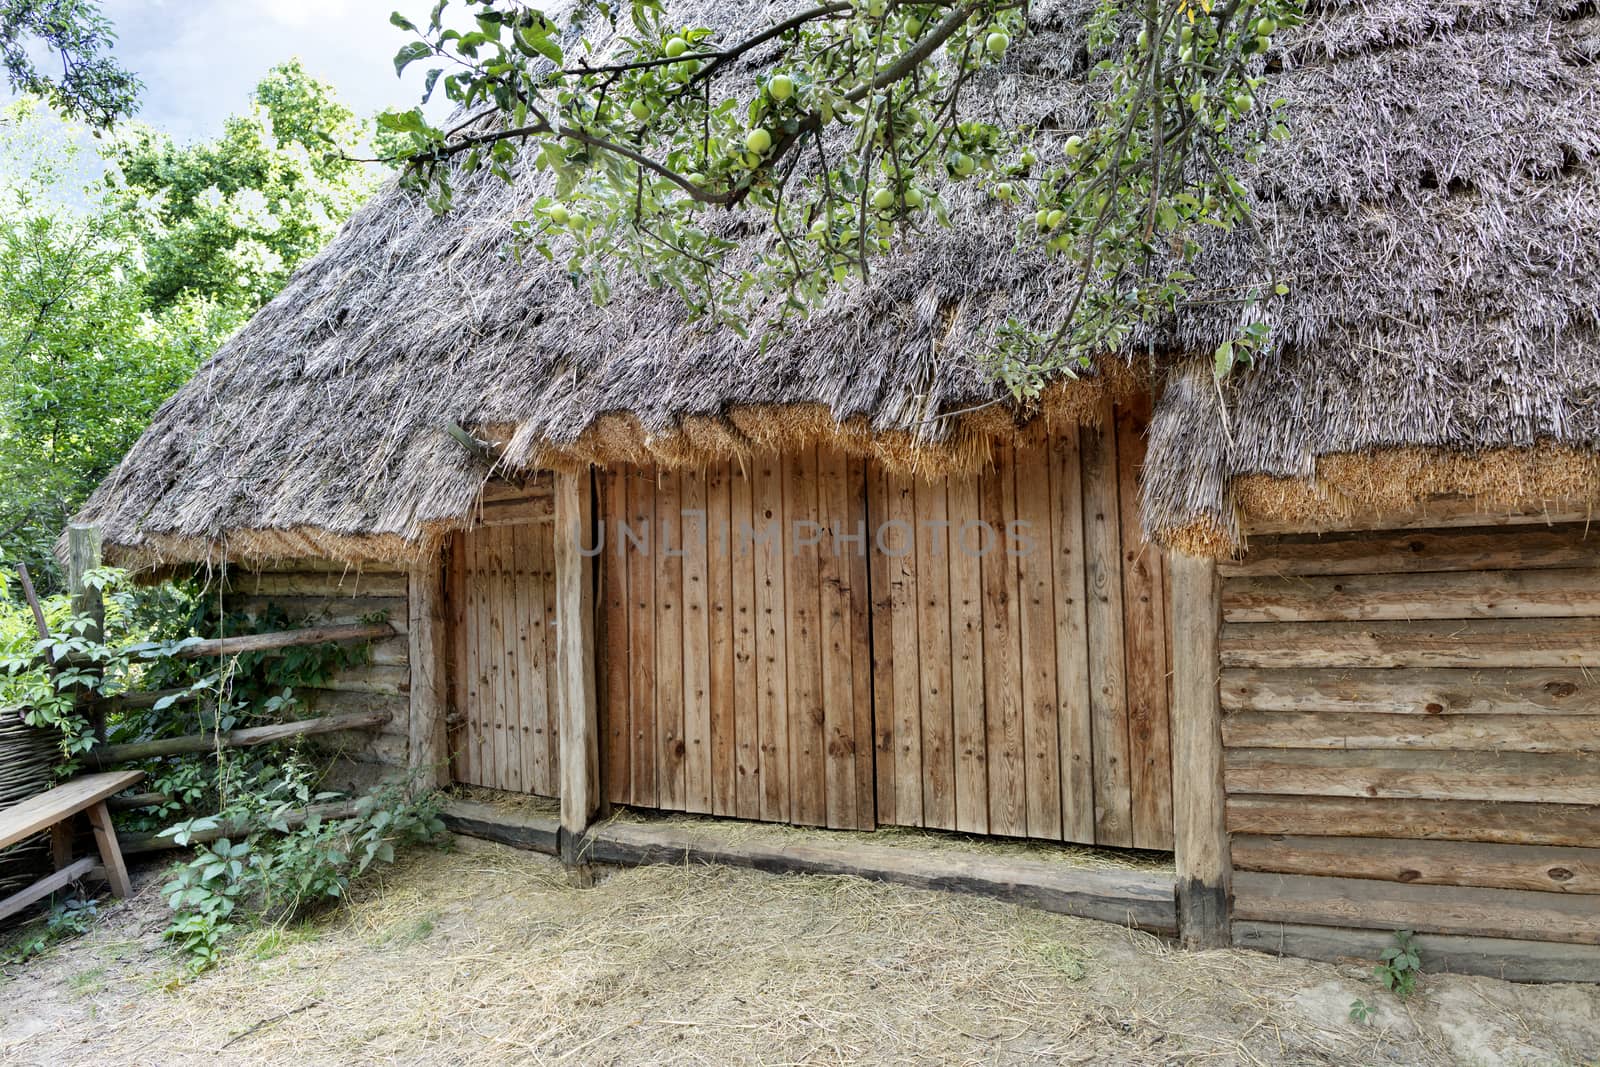 Old traditional Ukrainian rural barn with a thatched roof for dry grass and a wooden, wicker fence around it in a green garden